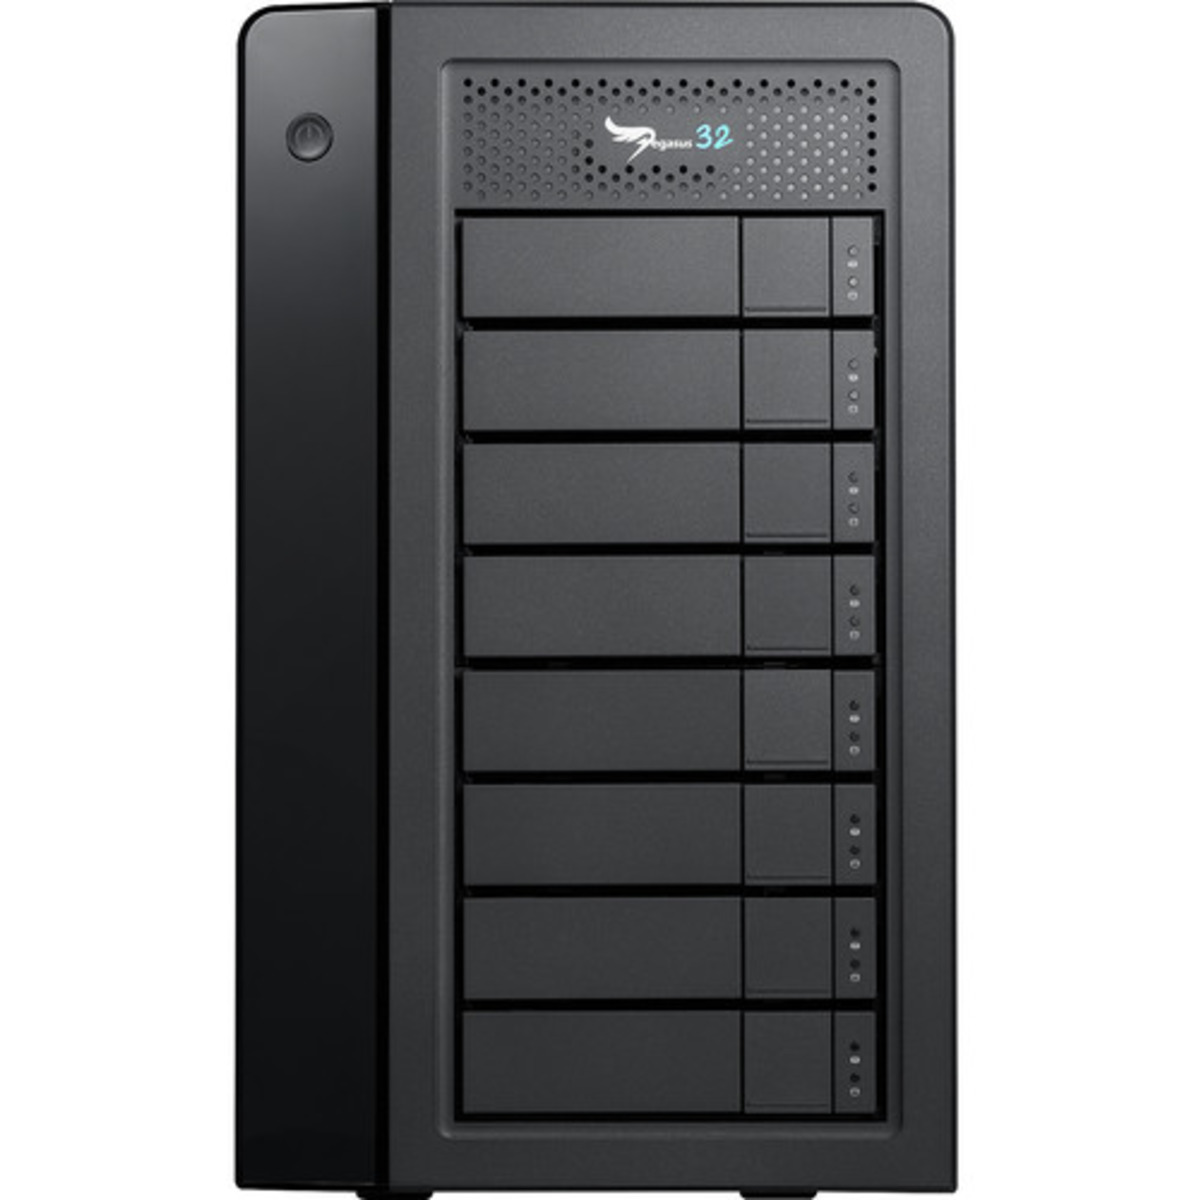 Promise Technology Pegasus32 R8 Thunderbolt 3 20tb 8-Bay Desktop Multimedia / Power User / Business DAS - Direct Attached Storage Device 5x4tb Seagate IronWolf Pro ST4000NE001 3.5 7200rpm SATA 6Gb/s HDD NAS Class Drives Installed - Burn-In Tested - ON SALE Pegasus32 R8 Thunderbolt 3